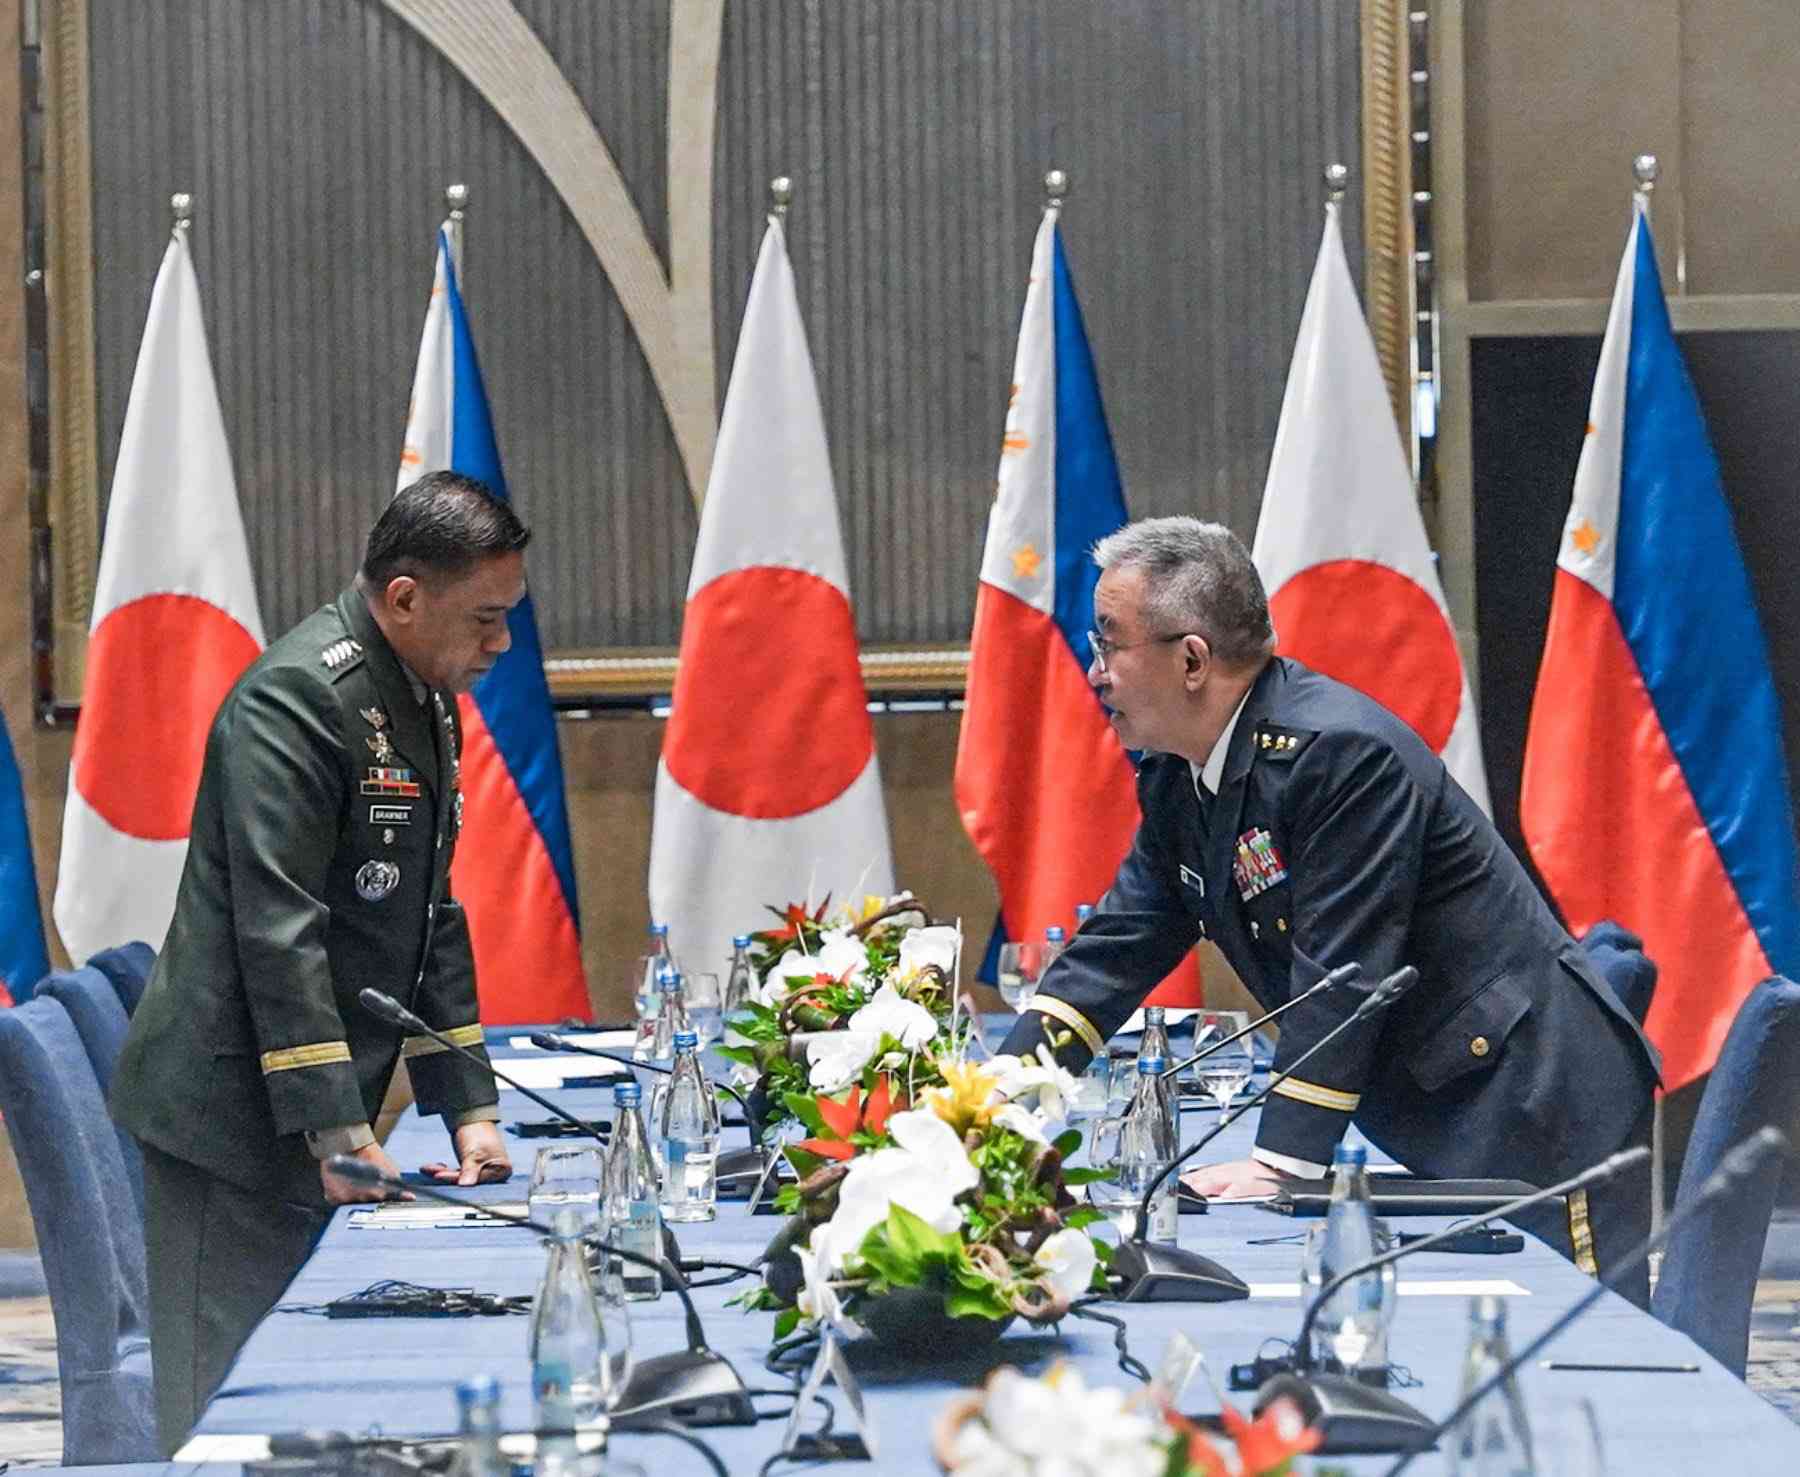 RAA with Japan, a milestone for ensuring peace and stability in the Indo-Pacific region — AFP